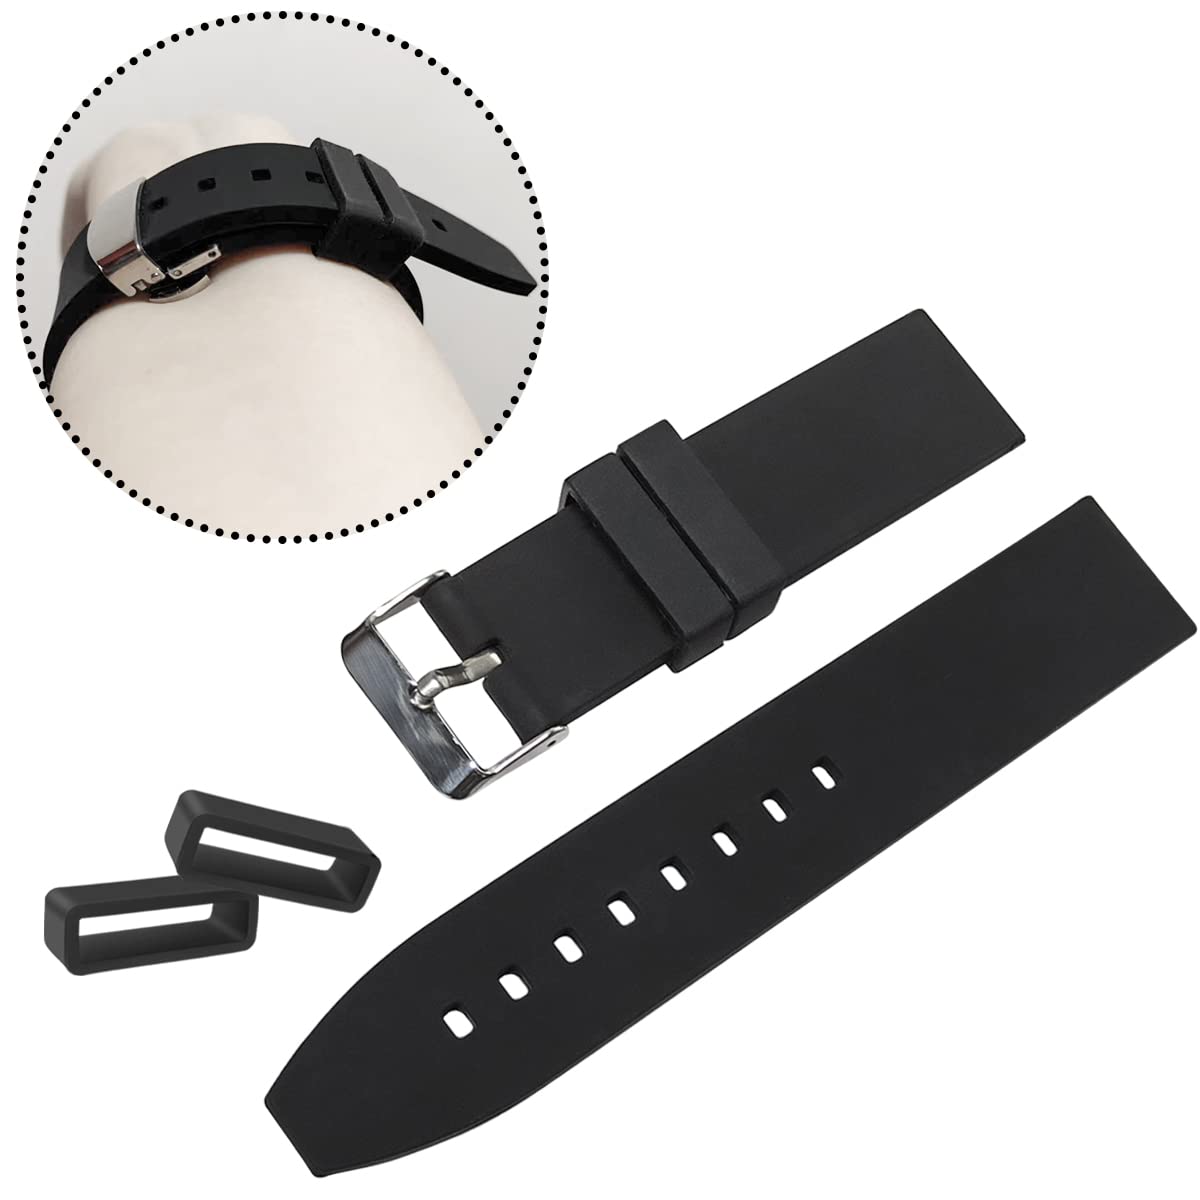 6 Pcs Watch Band Loop Holder Keeper for Resin Belt, Replacement Fastener Rings for Silicone Leather Rubber Watch Strap, Durable Fastener Retainer Size(16mm)